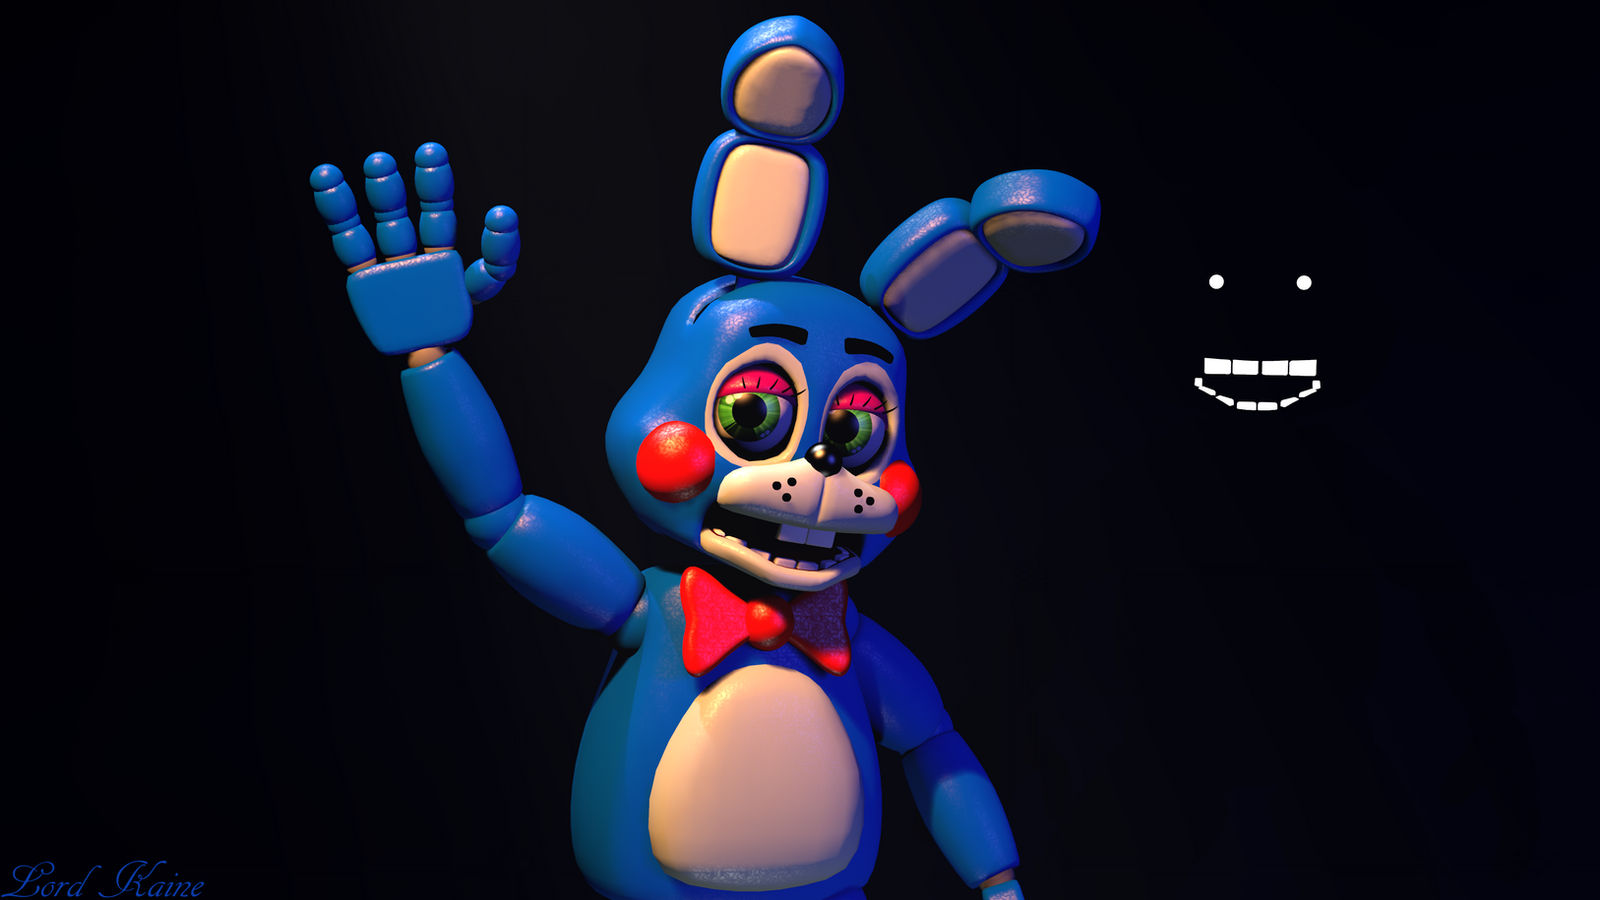 Toy Bonnie Wallpapers